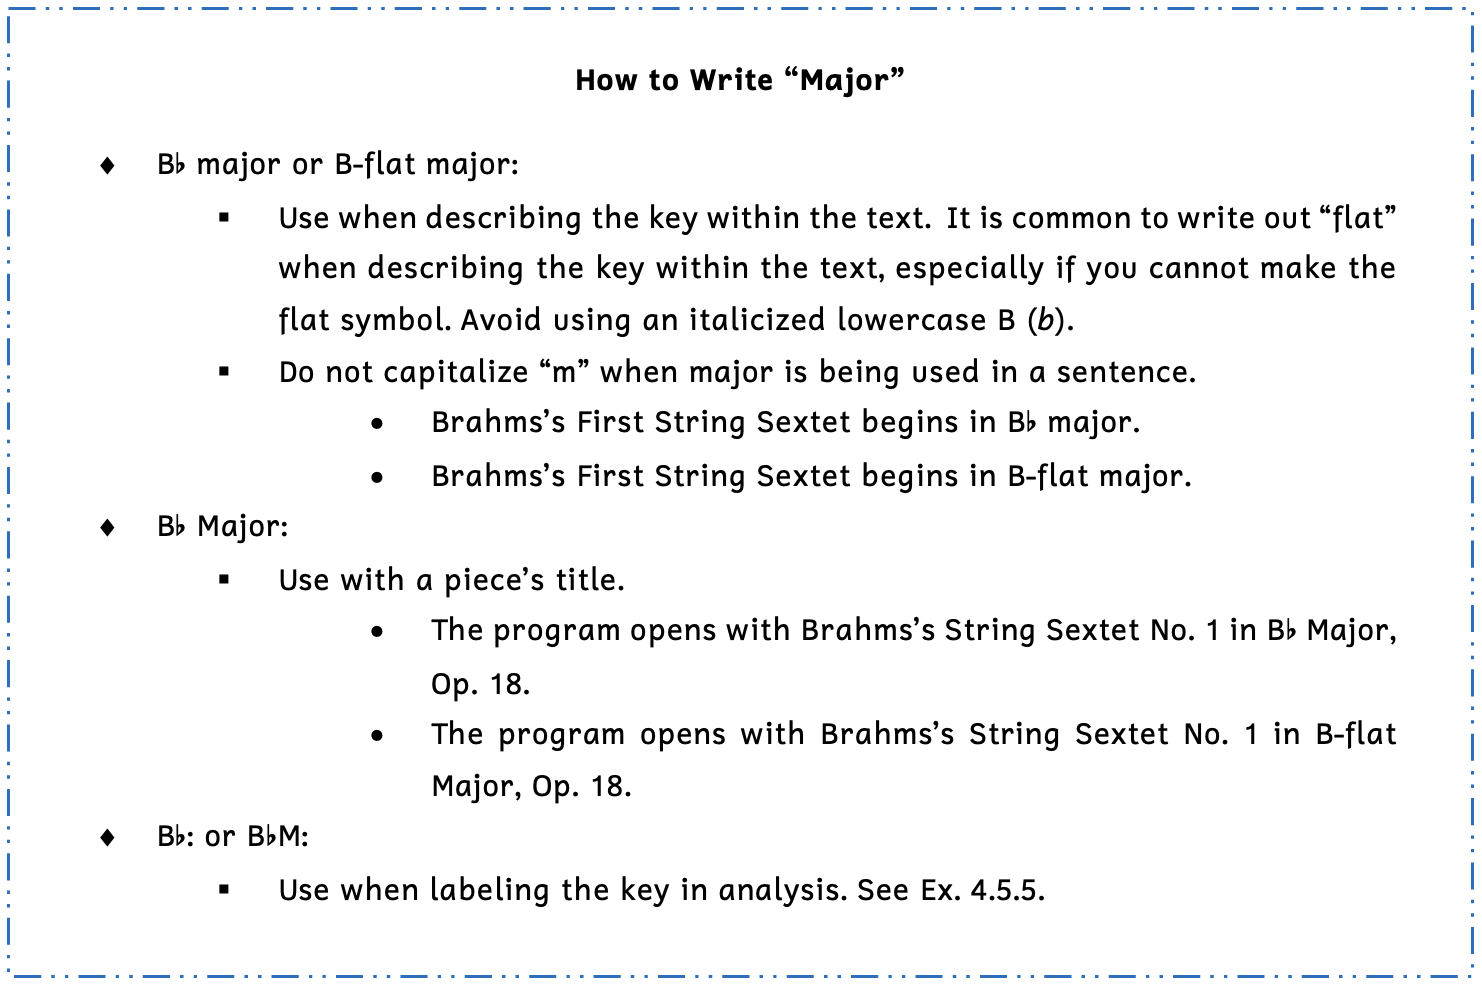 Summary box on how to write "B-flat major." First, you can write an uppercase B followed by a flat symbol and the word major with a lowercase m or an uppercase B with a dash and the word flat and the word major with a a lowercase m. Use these when describing the key within the text. It is common to write out the word flat when describing the key within the text, especially if you cannot make the flat symbol. Avoid using an italicized lowercase B for the flat symbol. Do not capitalize the letter m when major is being used in a sentence. For example, in the sentence Brahms's First String Sextet begins in B-flat major, the word major would use a lowercase m. Second, you can write B-flat major with an uppercase M when you are writing the title of a piece. For example, "The program opens with Brahms's String Sextet No. 1 in B-flat Major" would use an uppercase M since it is the title of the piece. Third, you can abbreviate an uppercase B followed by a flat symbol or an uppercase B followed by a flat symbol and an uppercase M when you are labeling the key in analysis. See Example 4.5.5.